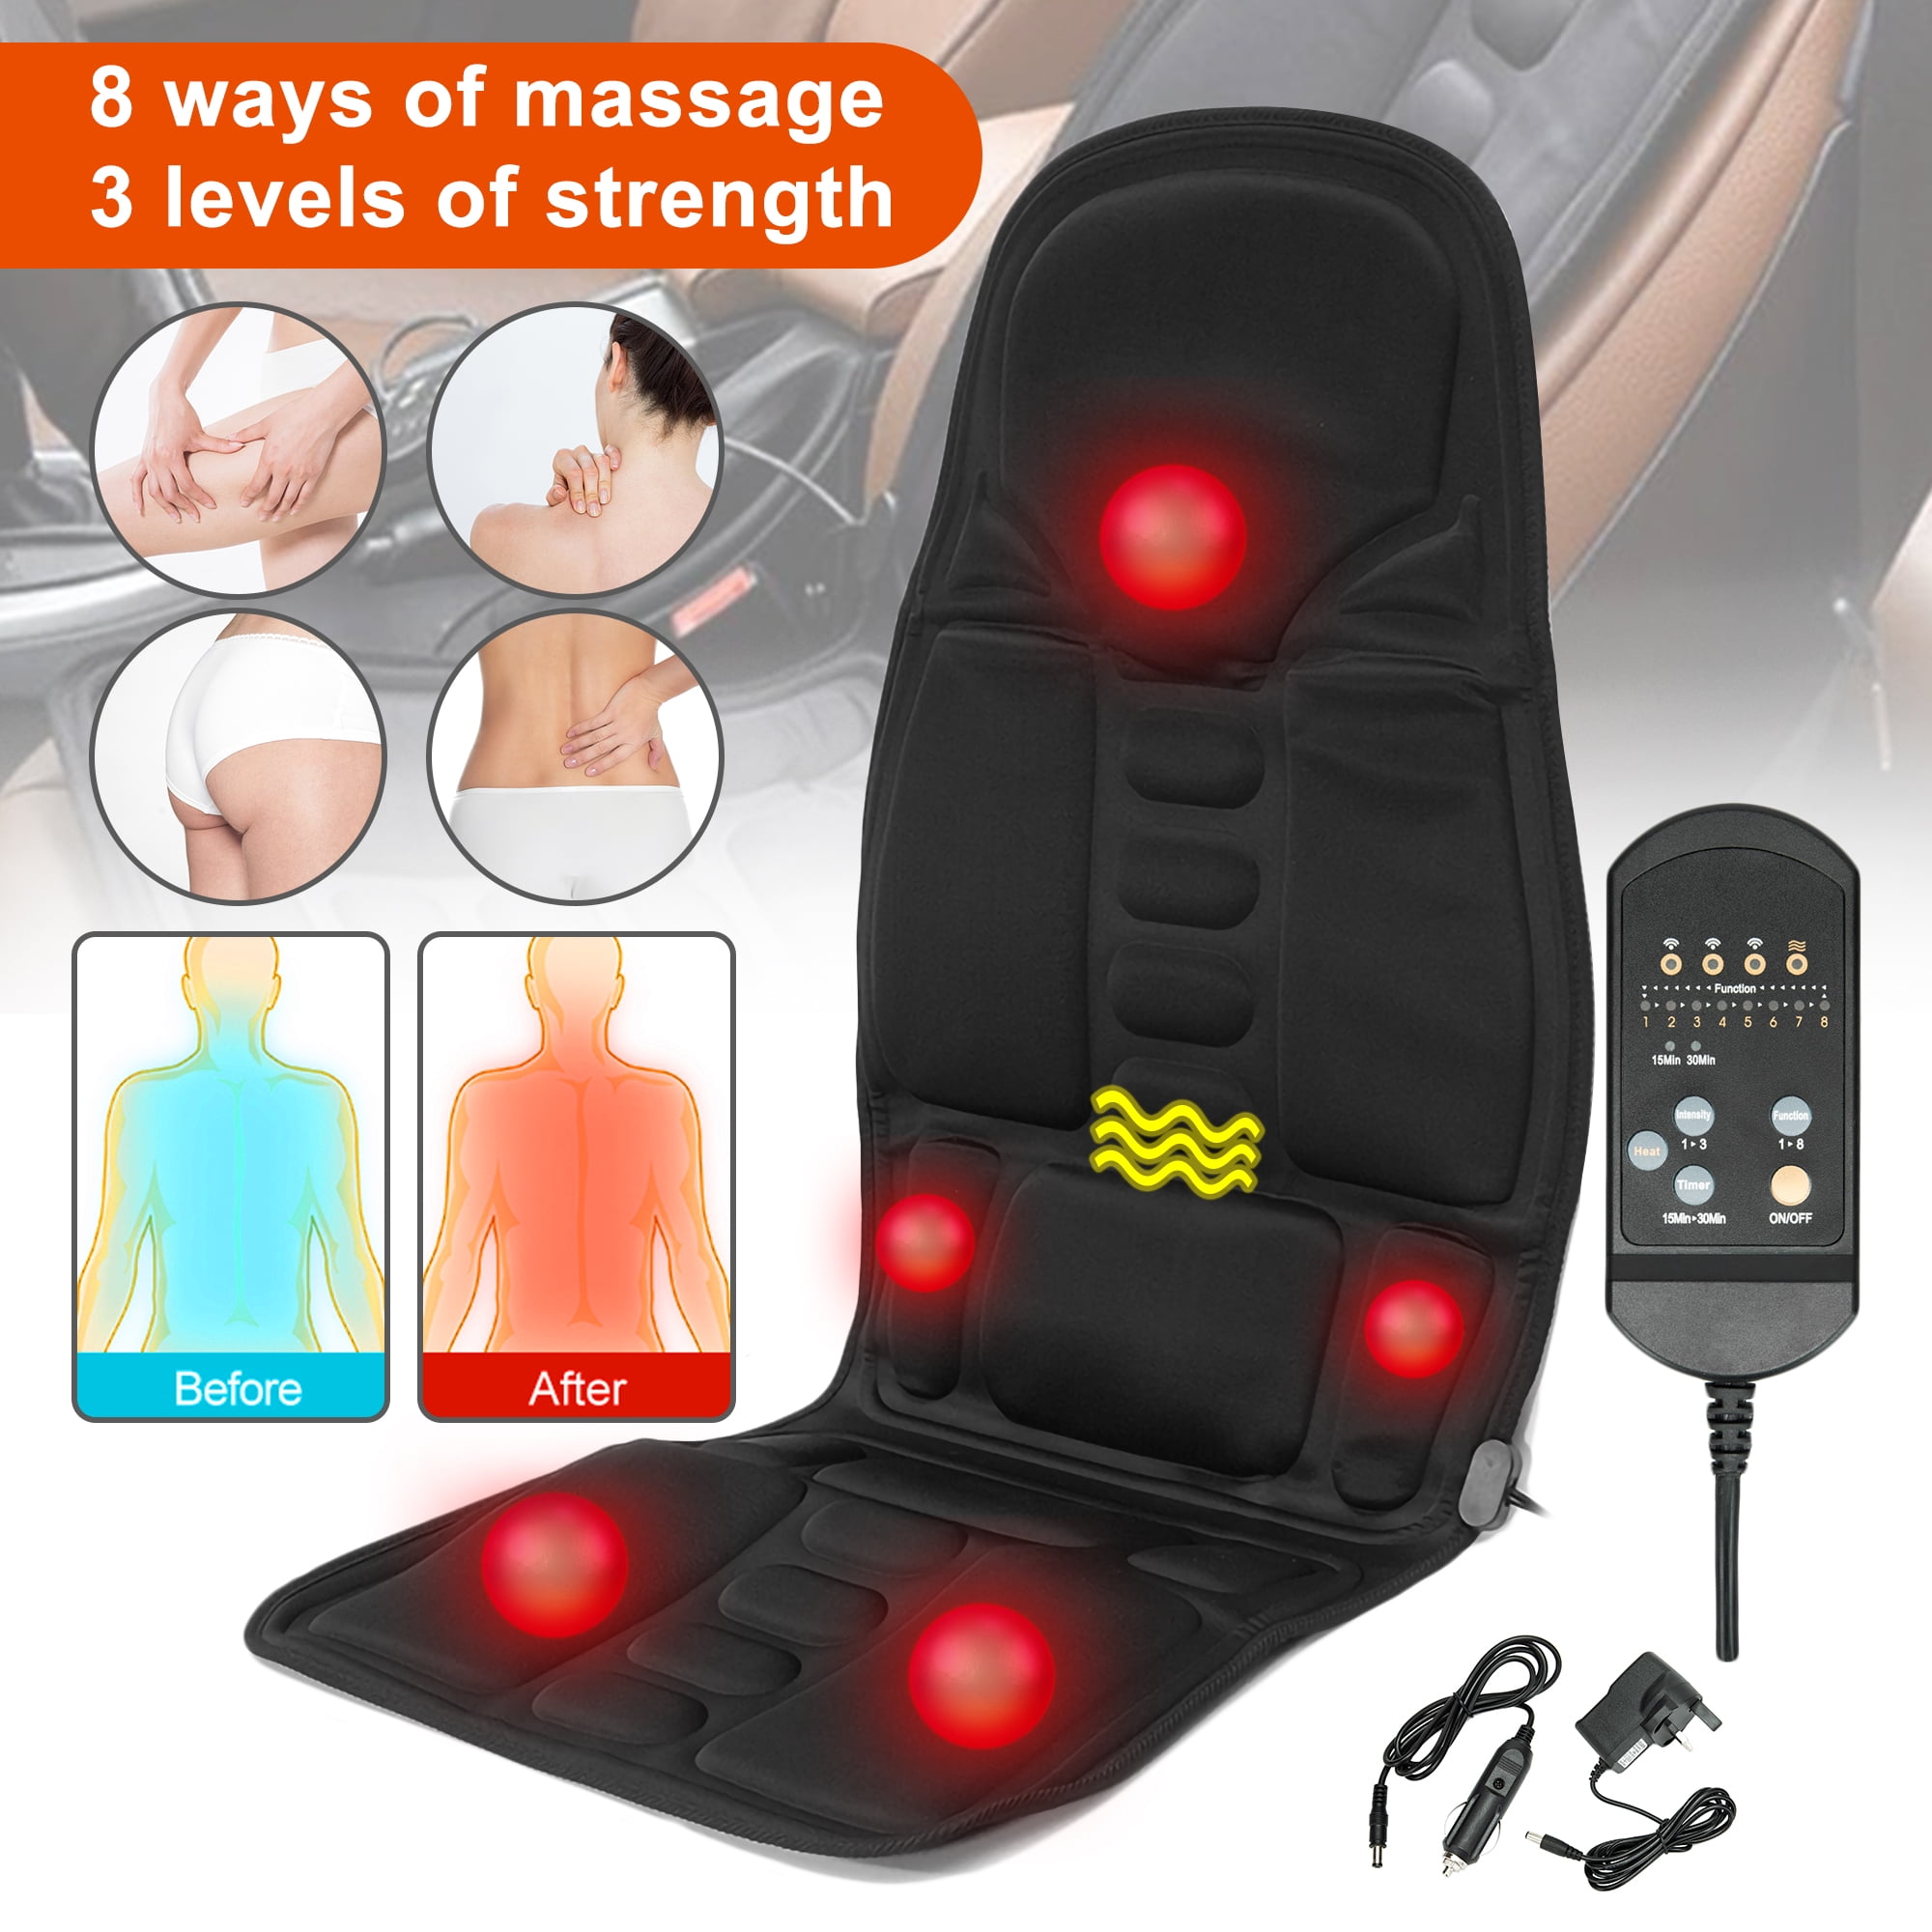 Full-Body Massage Chair Pad with Heat - Car Seat Massager – Body Massager